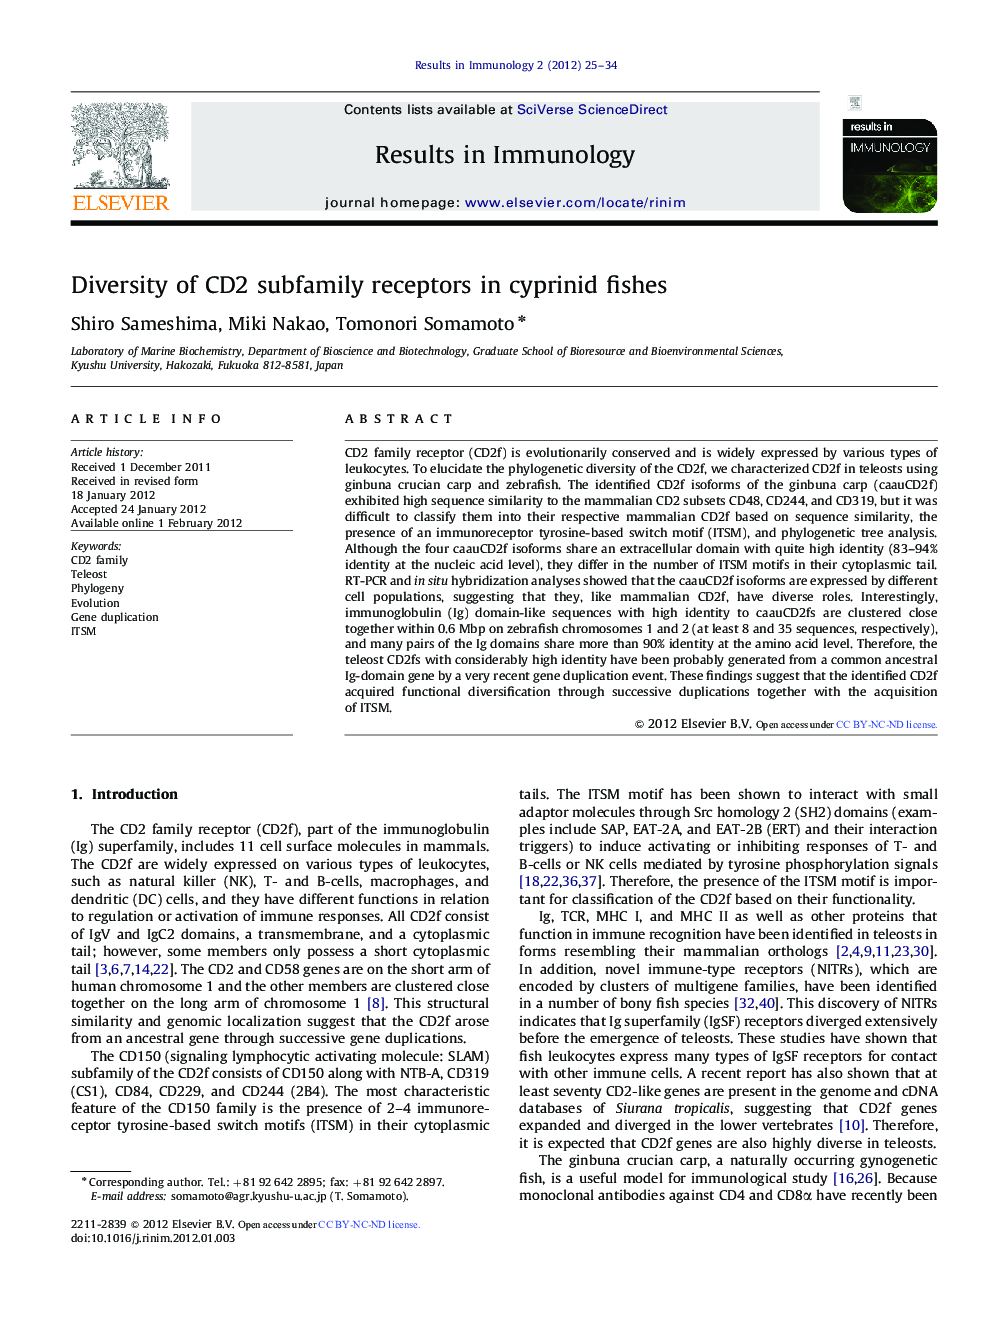 Diversity of CD2 subfamily receptors in cyprinid fishes